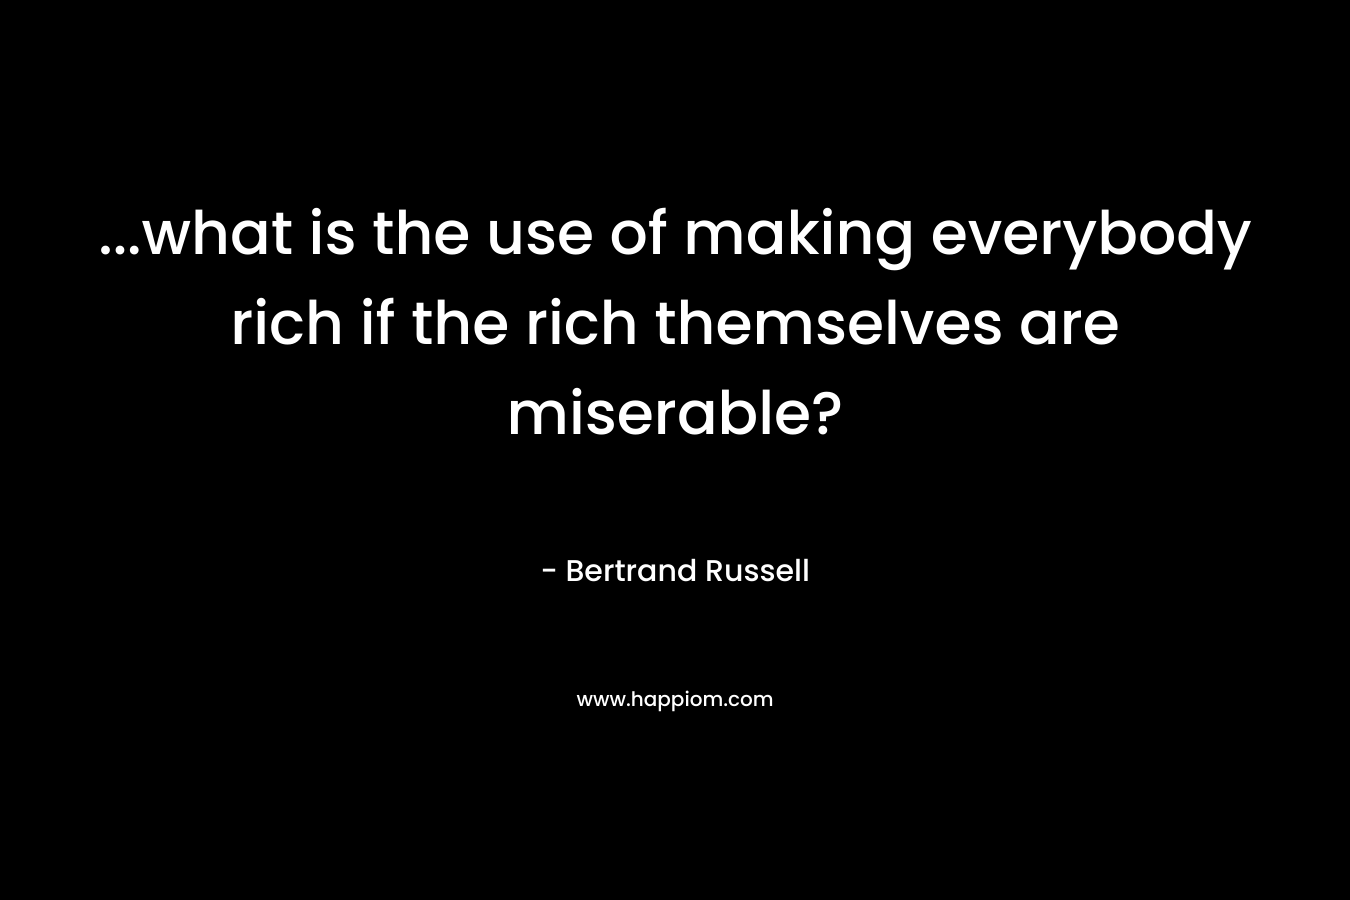 ...what is the use of making everybody rich if the rich themselves are miserable?